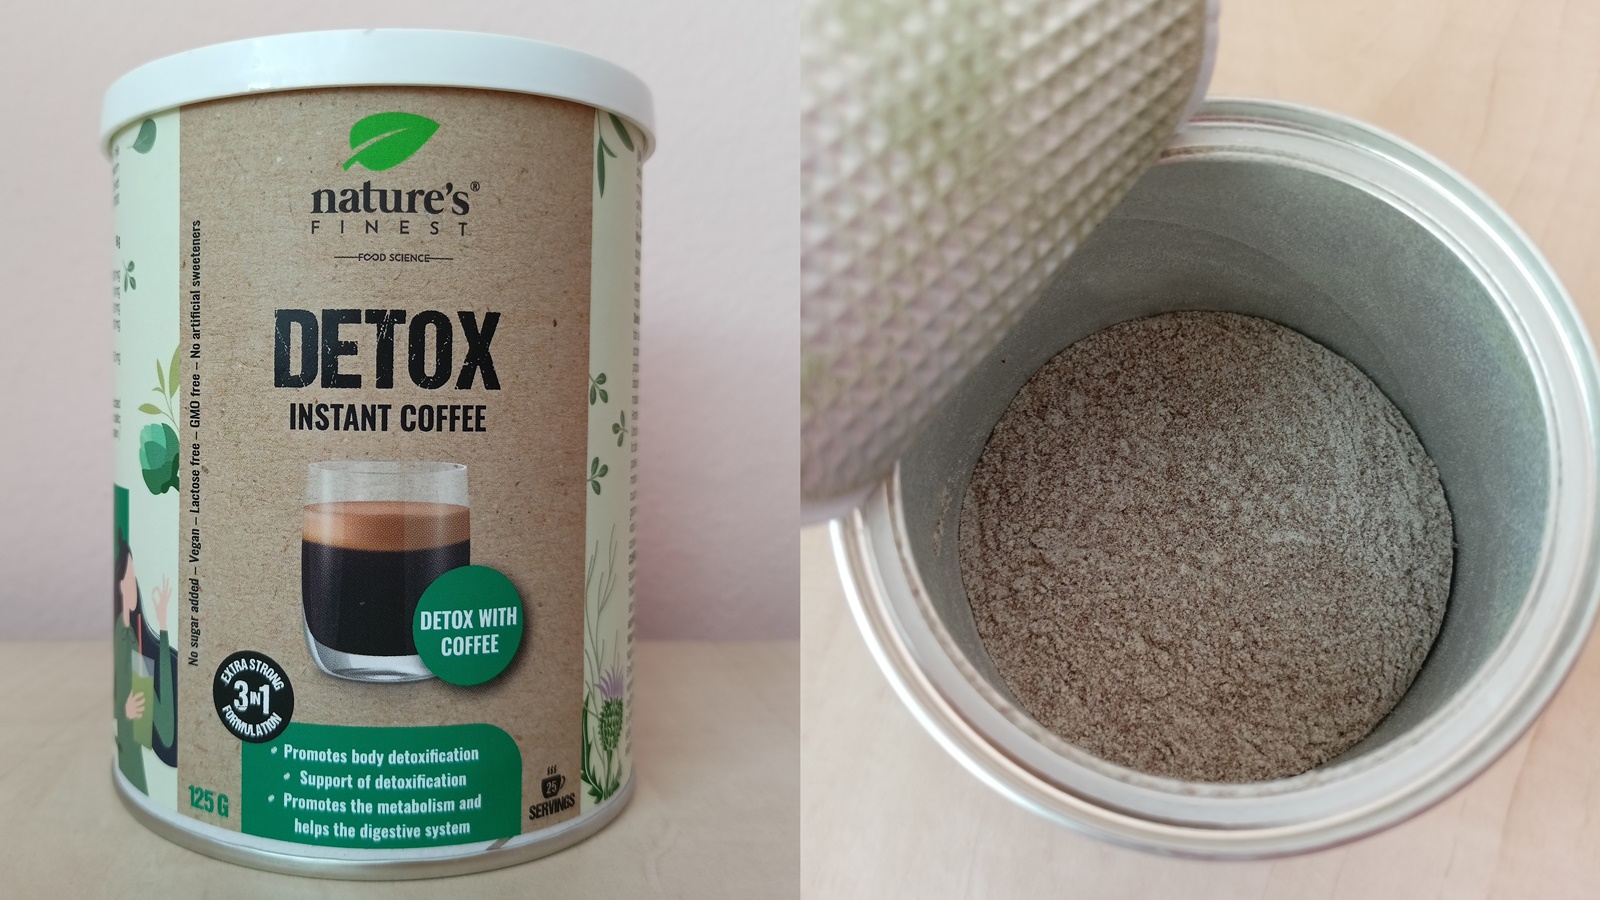 Review: Detox Instant Coffee by Nature’s Finest